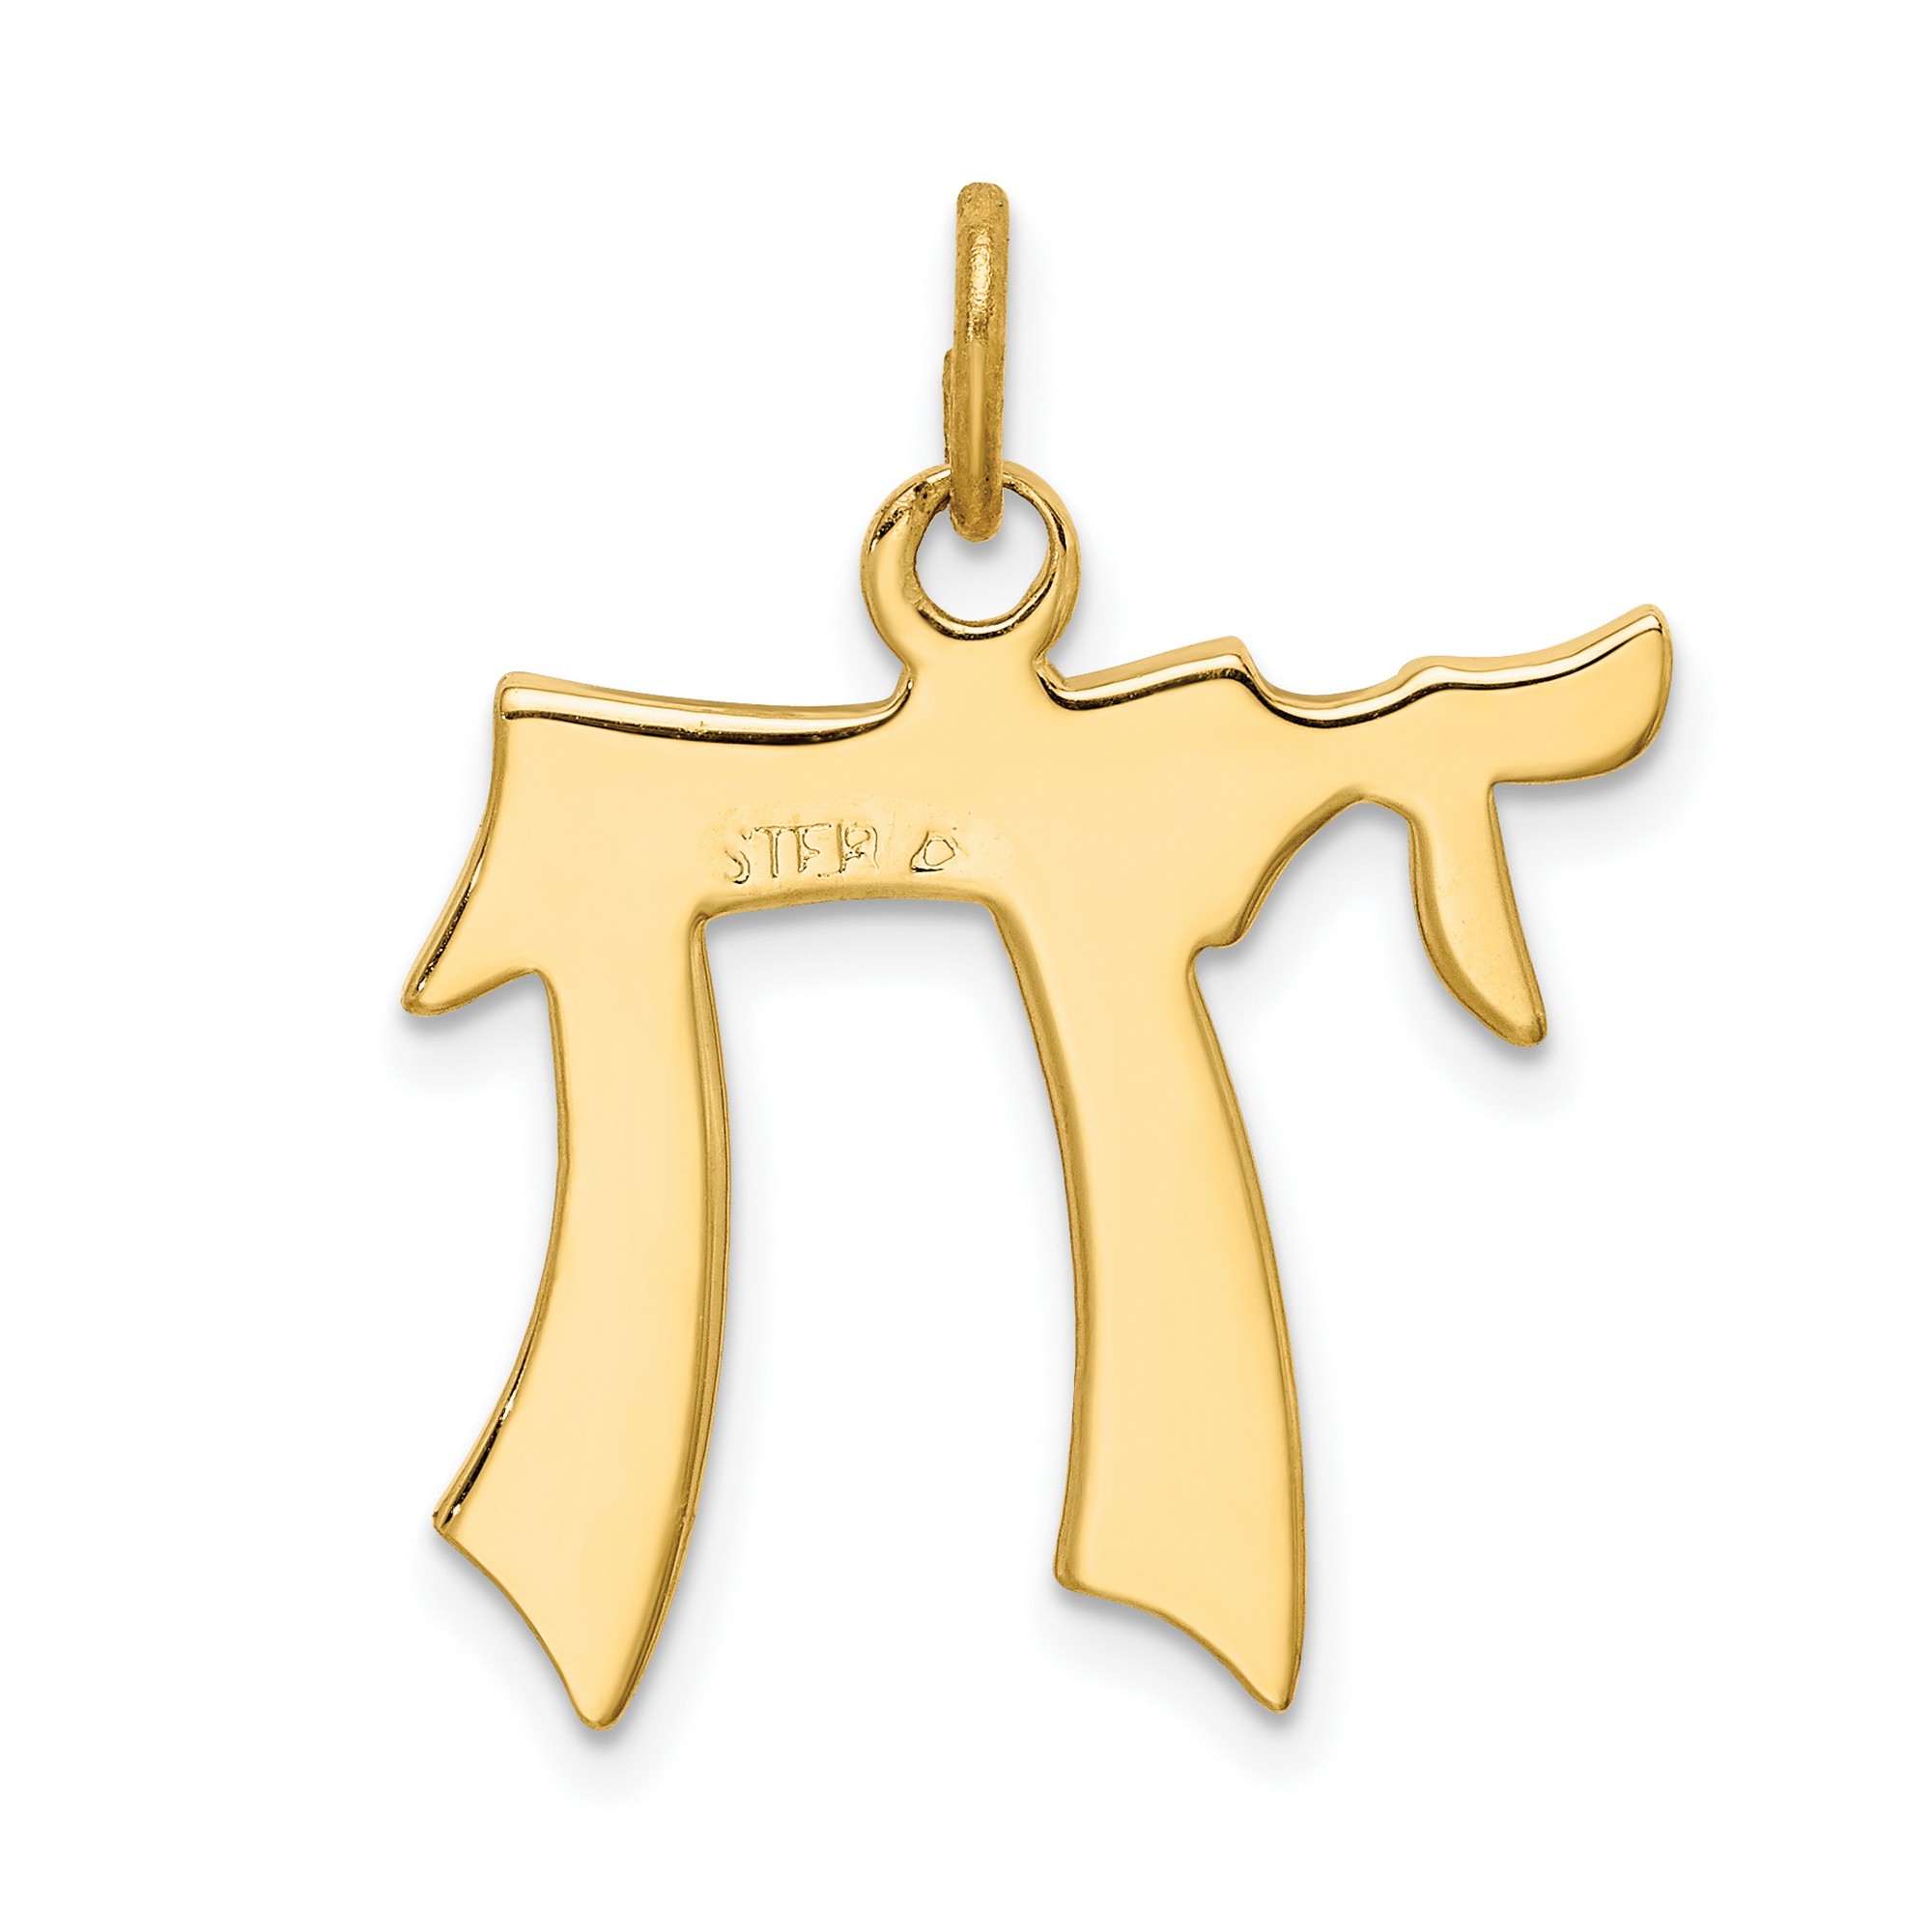 Polished Chai Symbol Charm Pendant In Gold Tone 925 Sterling Silver 1 ...